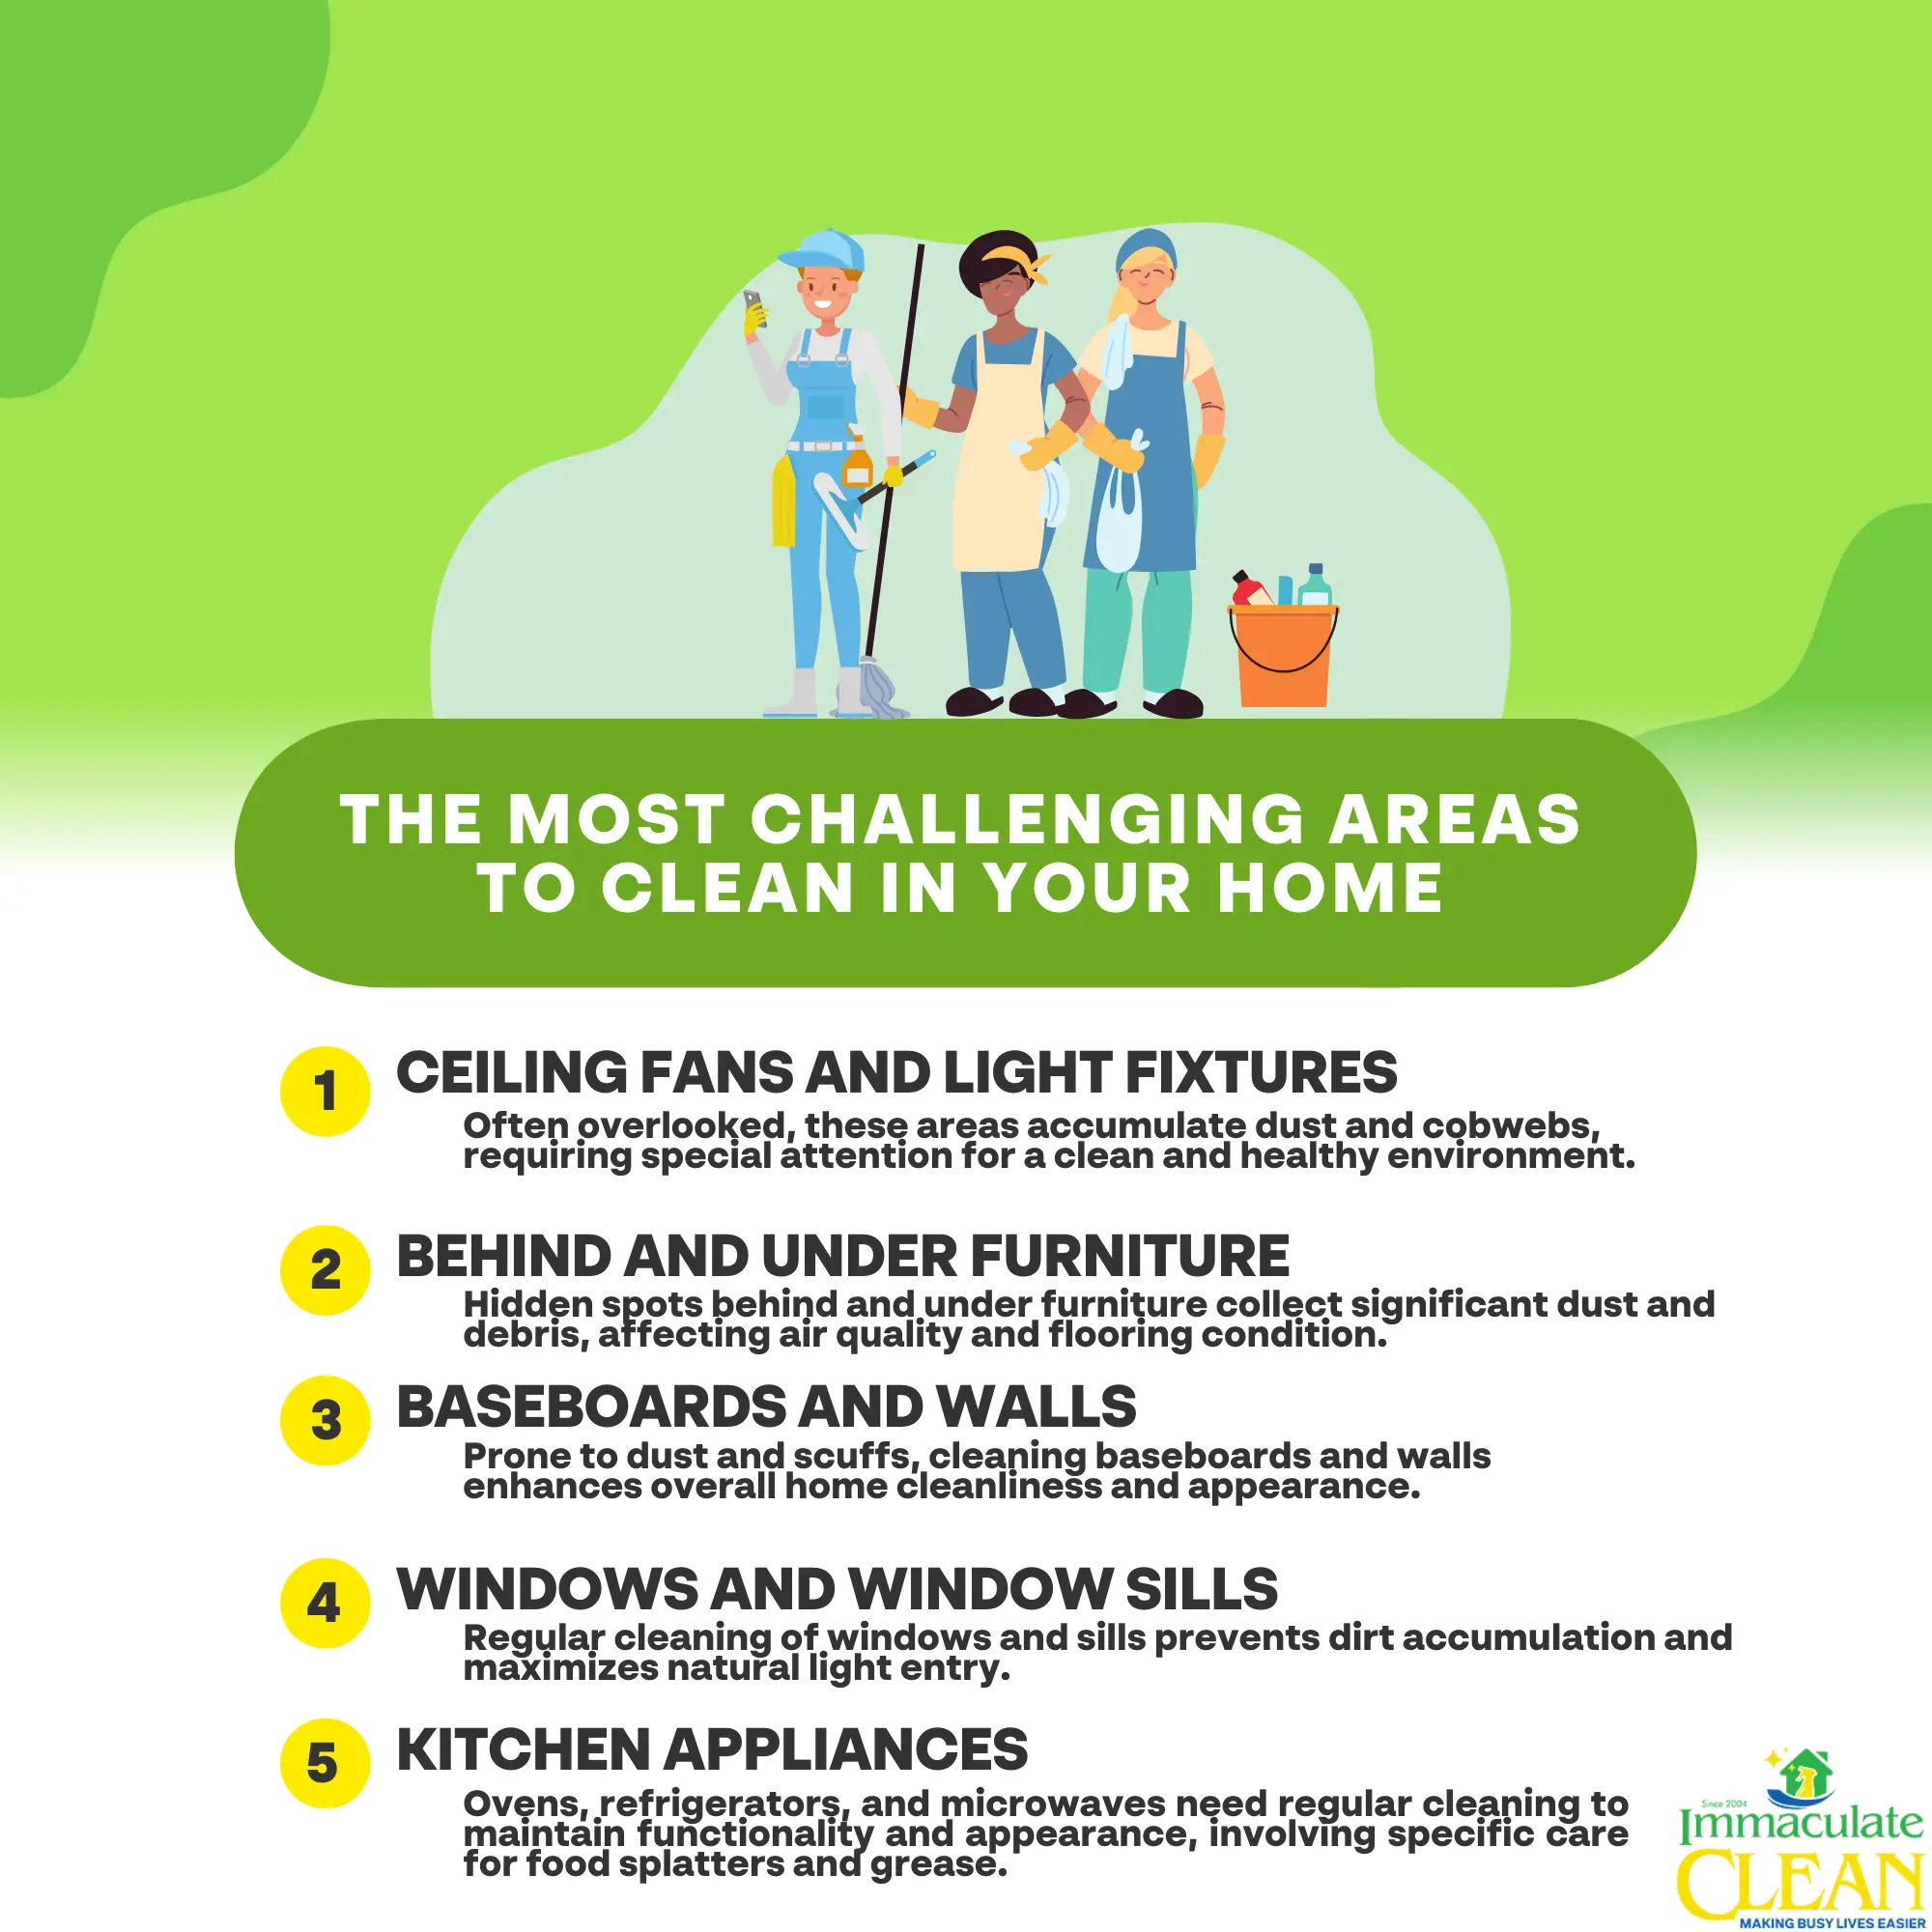 The Most Challenging Areas to Clean in Your Home